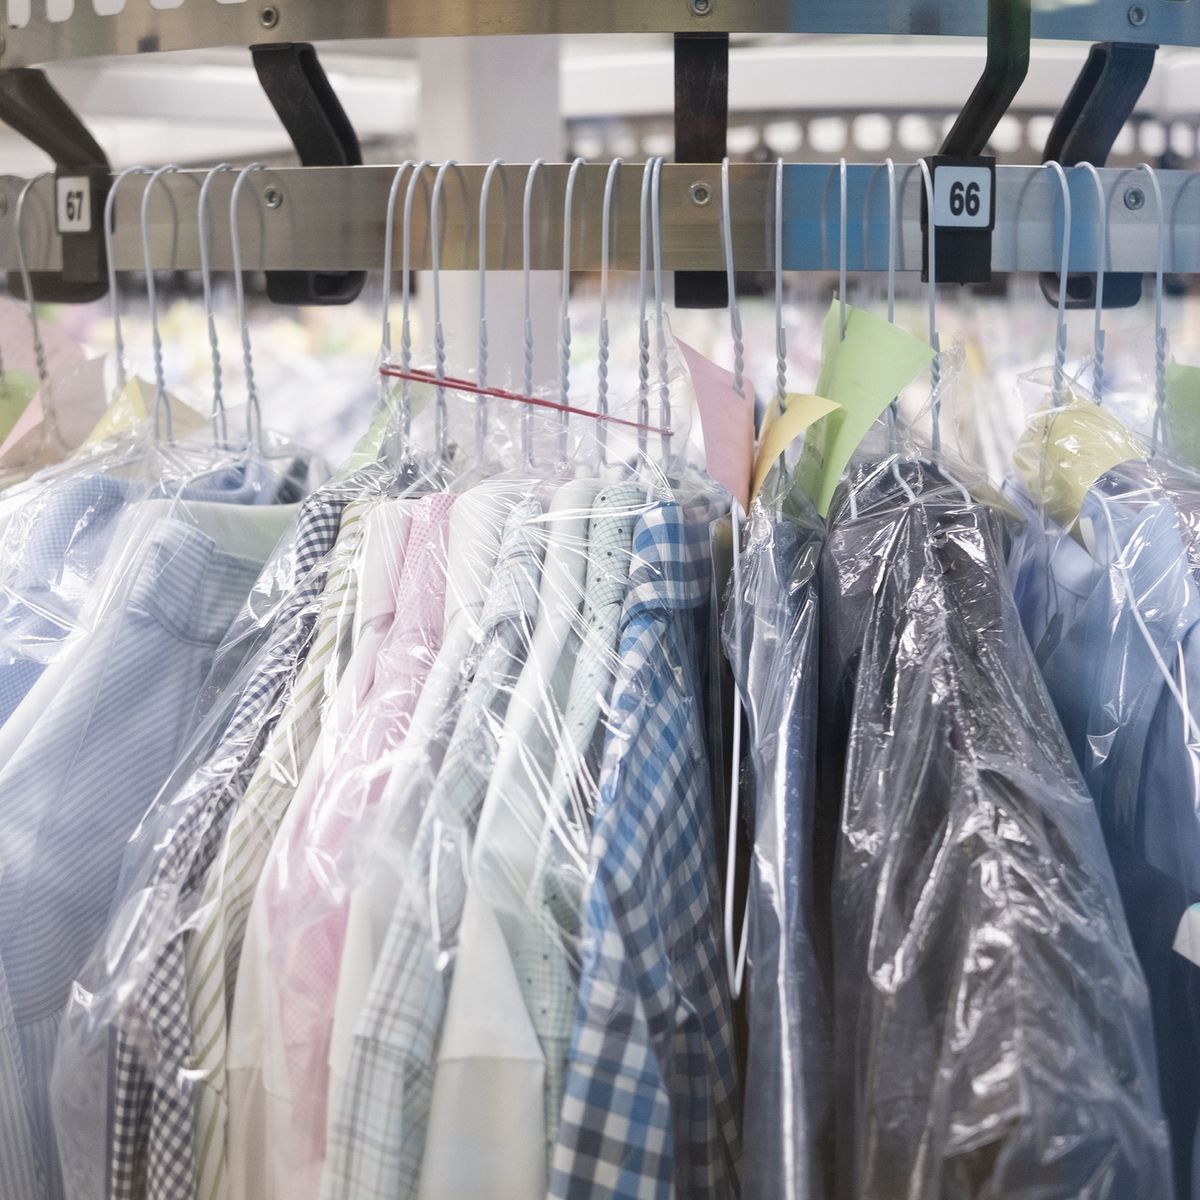 melon Læring Derfor What Is Dry Cleaning? - How the Dry Cleaning Process Works